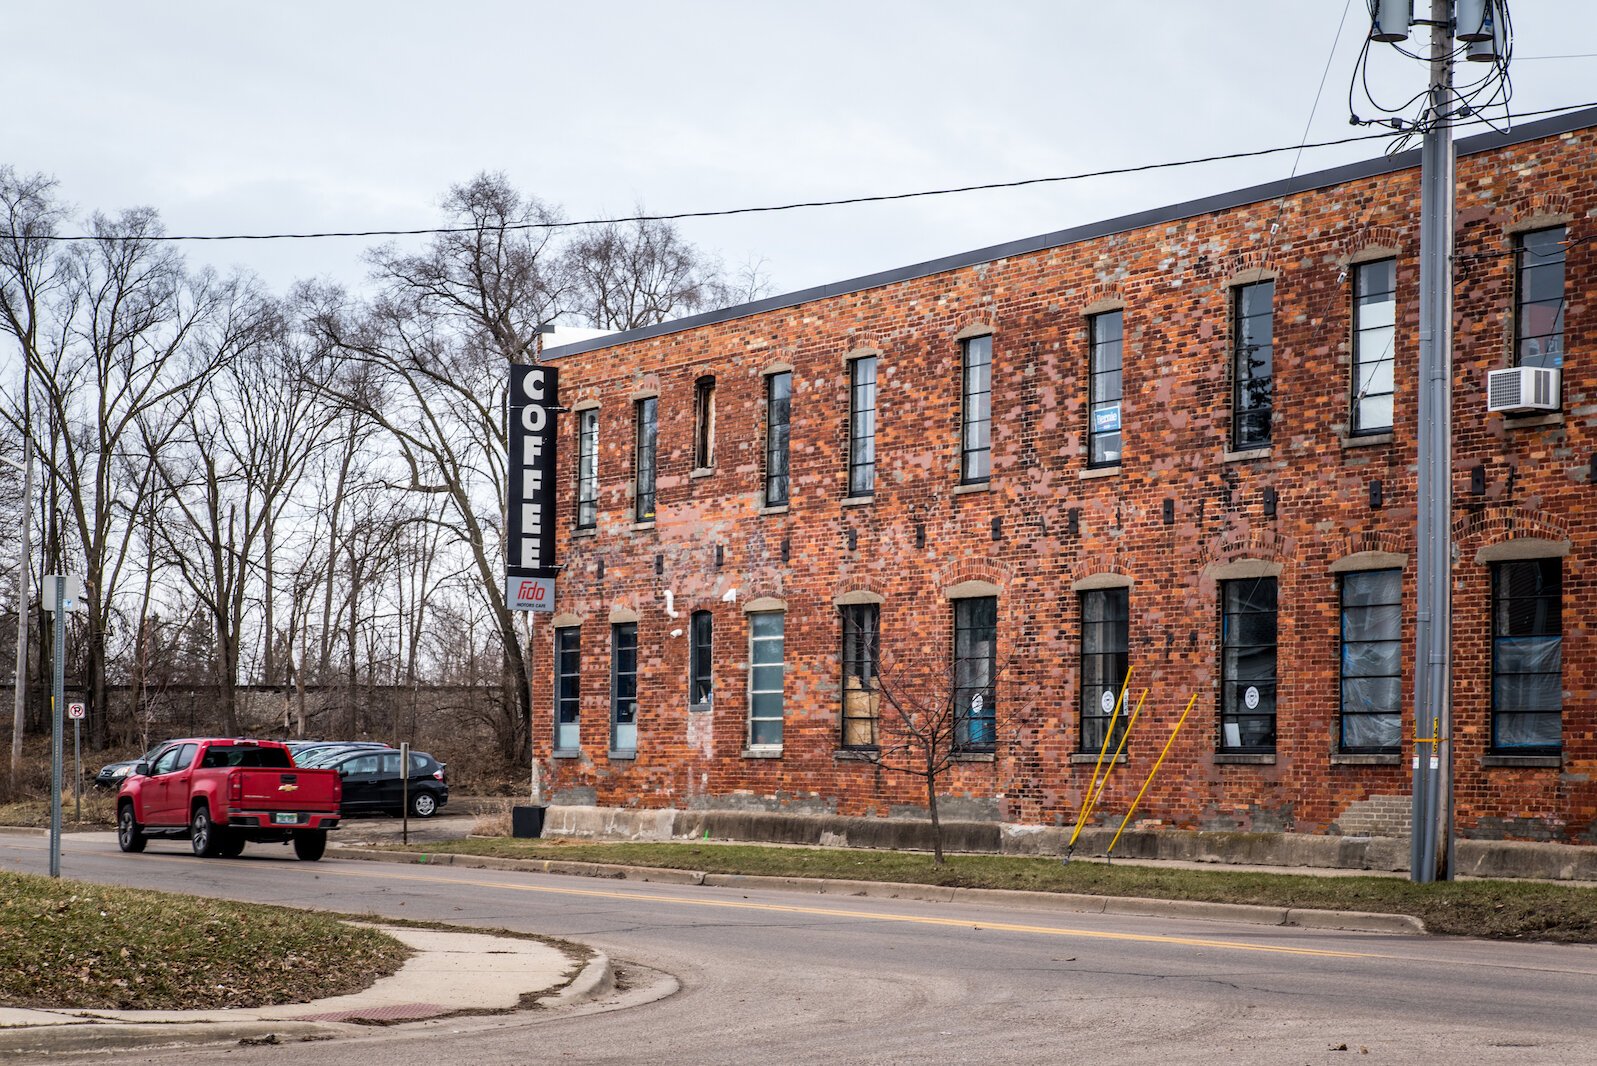 There will be performances at Jerico, the reclaimed portion of the neighborhood’s factory district, located in the 1500 block of Fulford Street.